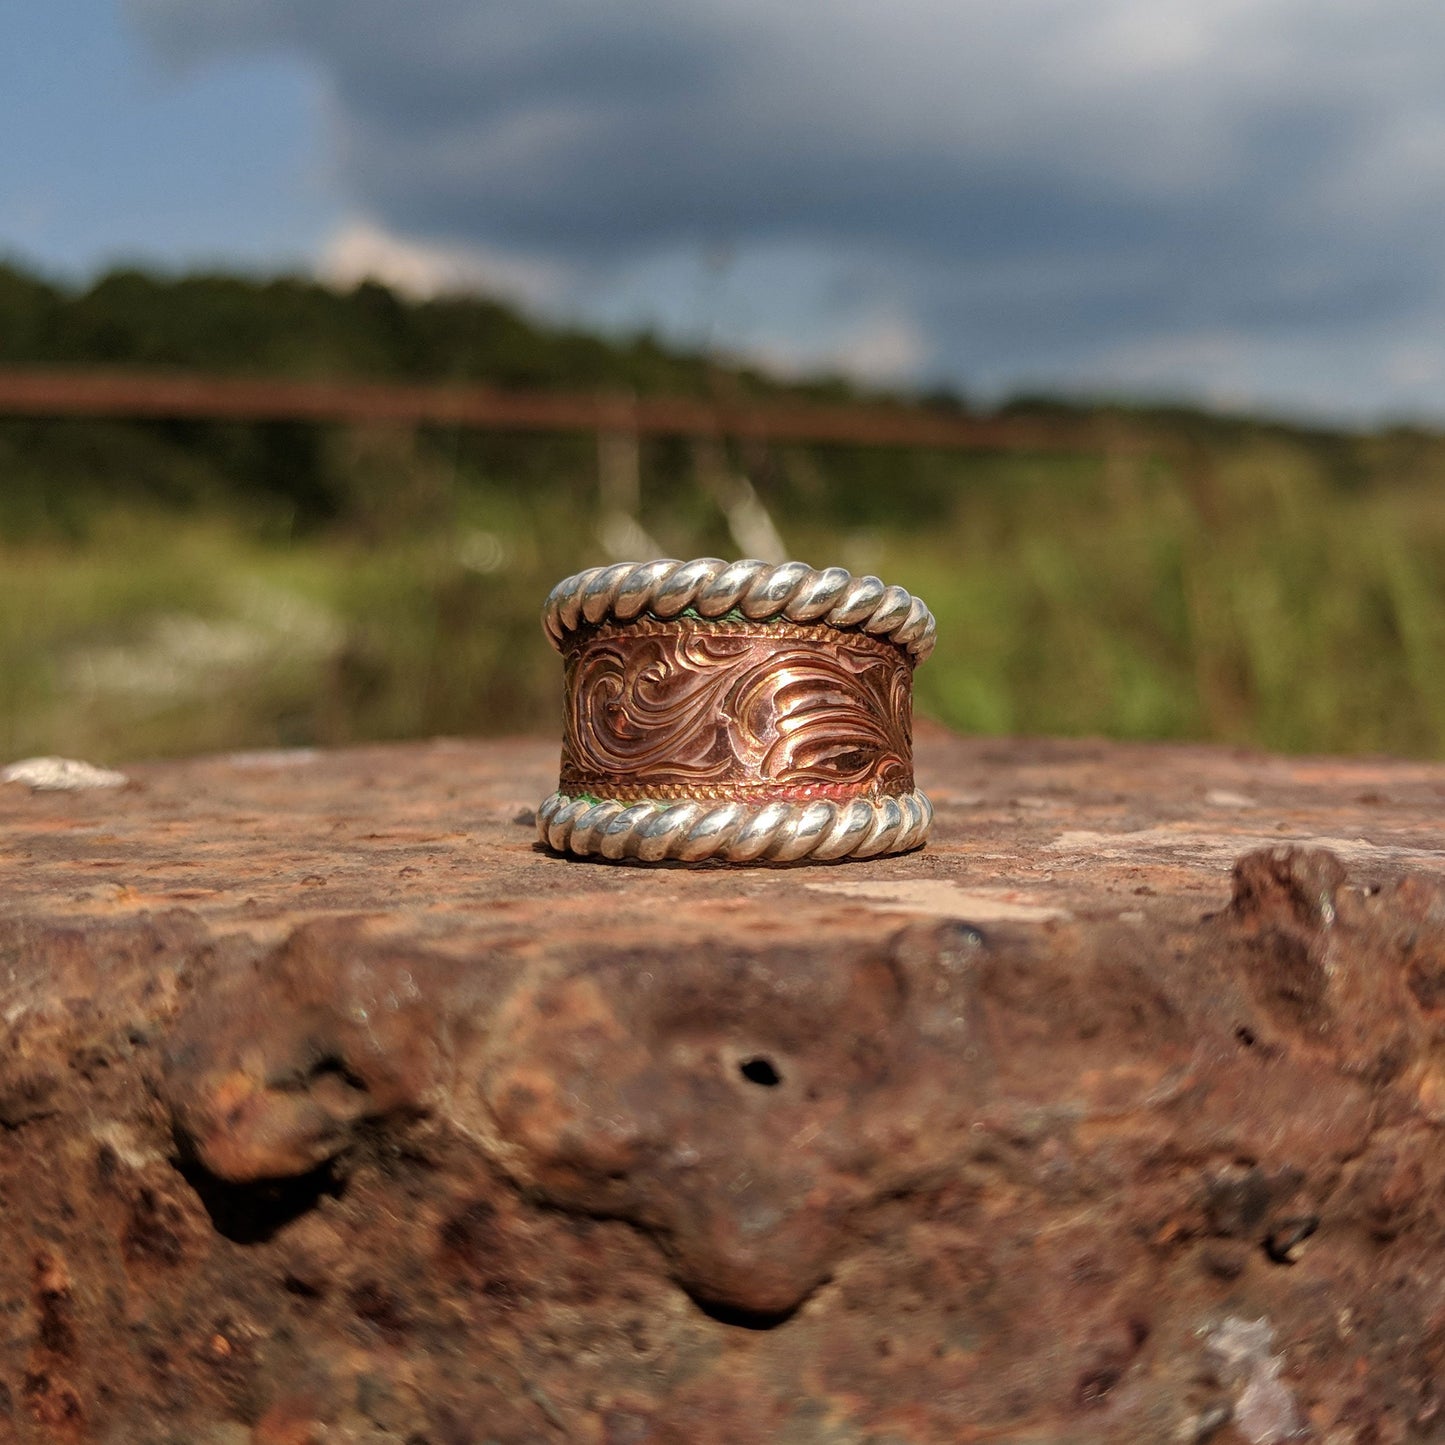 Copper Hand-Engraved Scroll Design Western Ring, Sterling Silver Rope Edge, Western Band Design RNG00016 by Loreena Rose